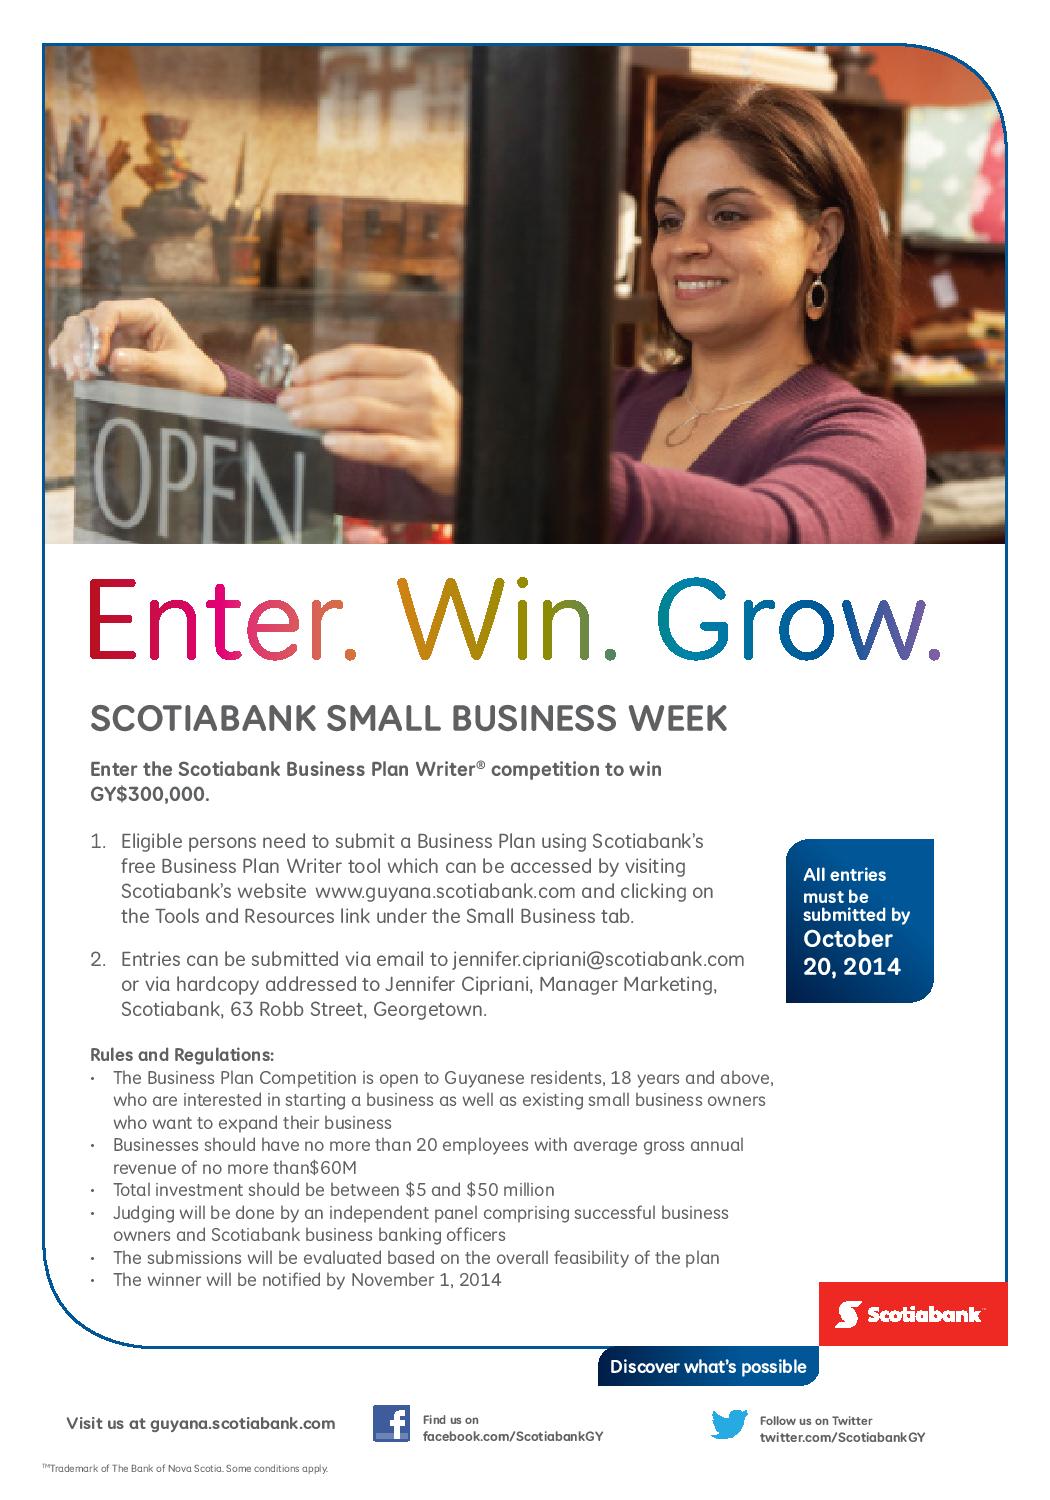 SCOTIABANK SMALL BUSINESS WEEK